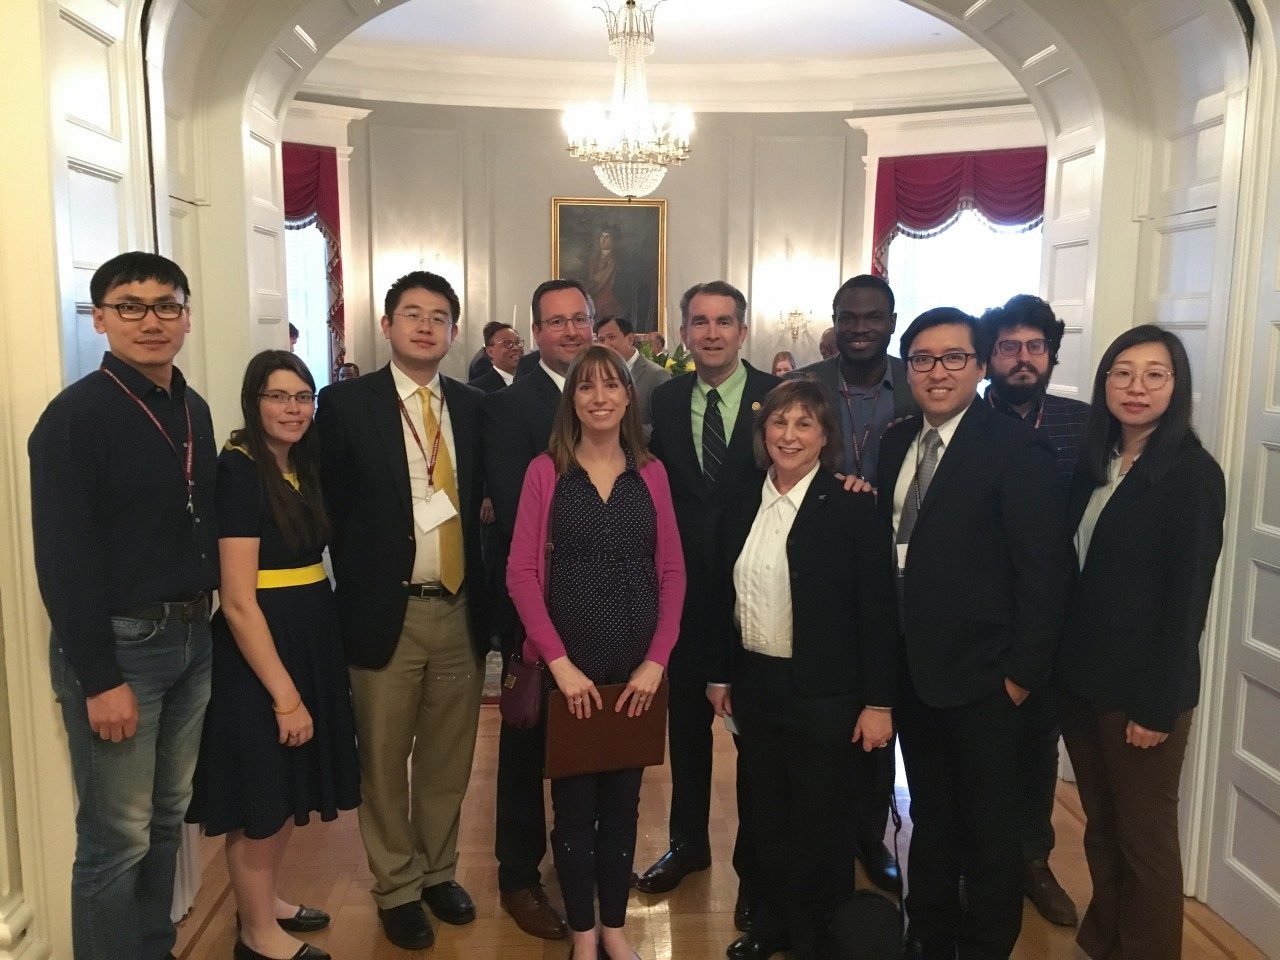 Agricultural and Applied Economics students and professors pose with Governor Ralph Northam inside the Executive Mansion.